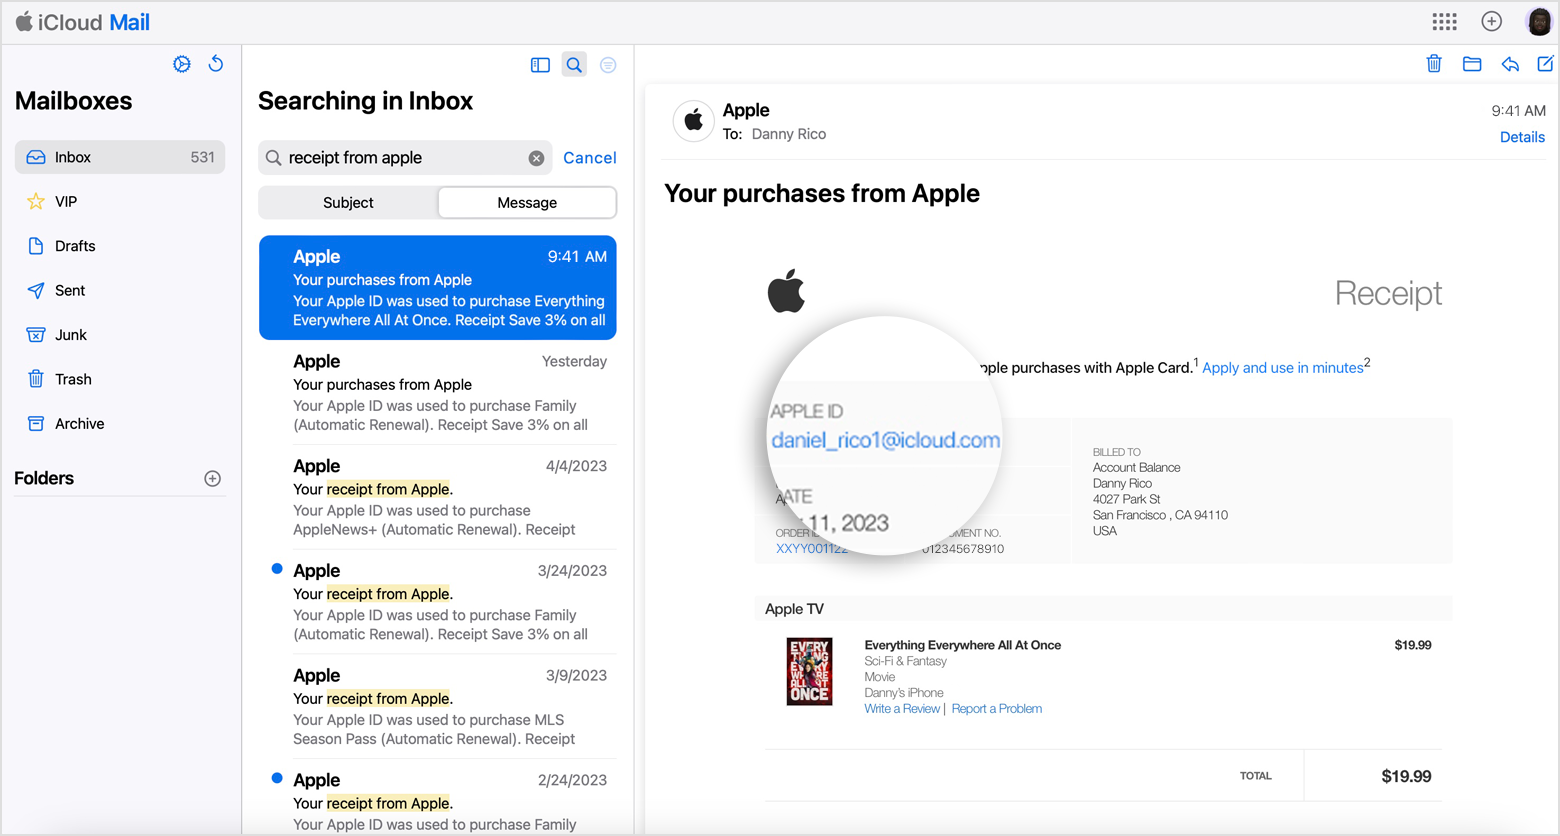 Email showing receipt from Apple that includes the Apple ID of the person who made the purchase.